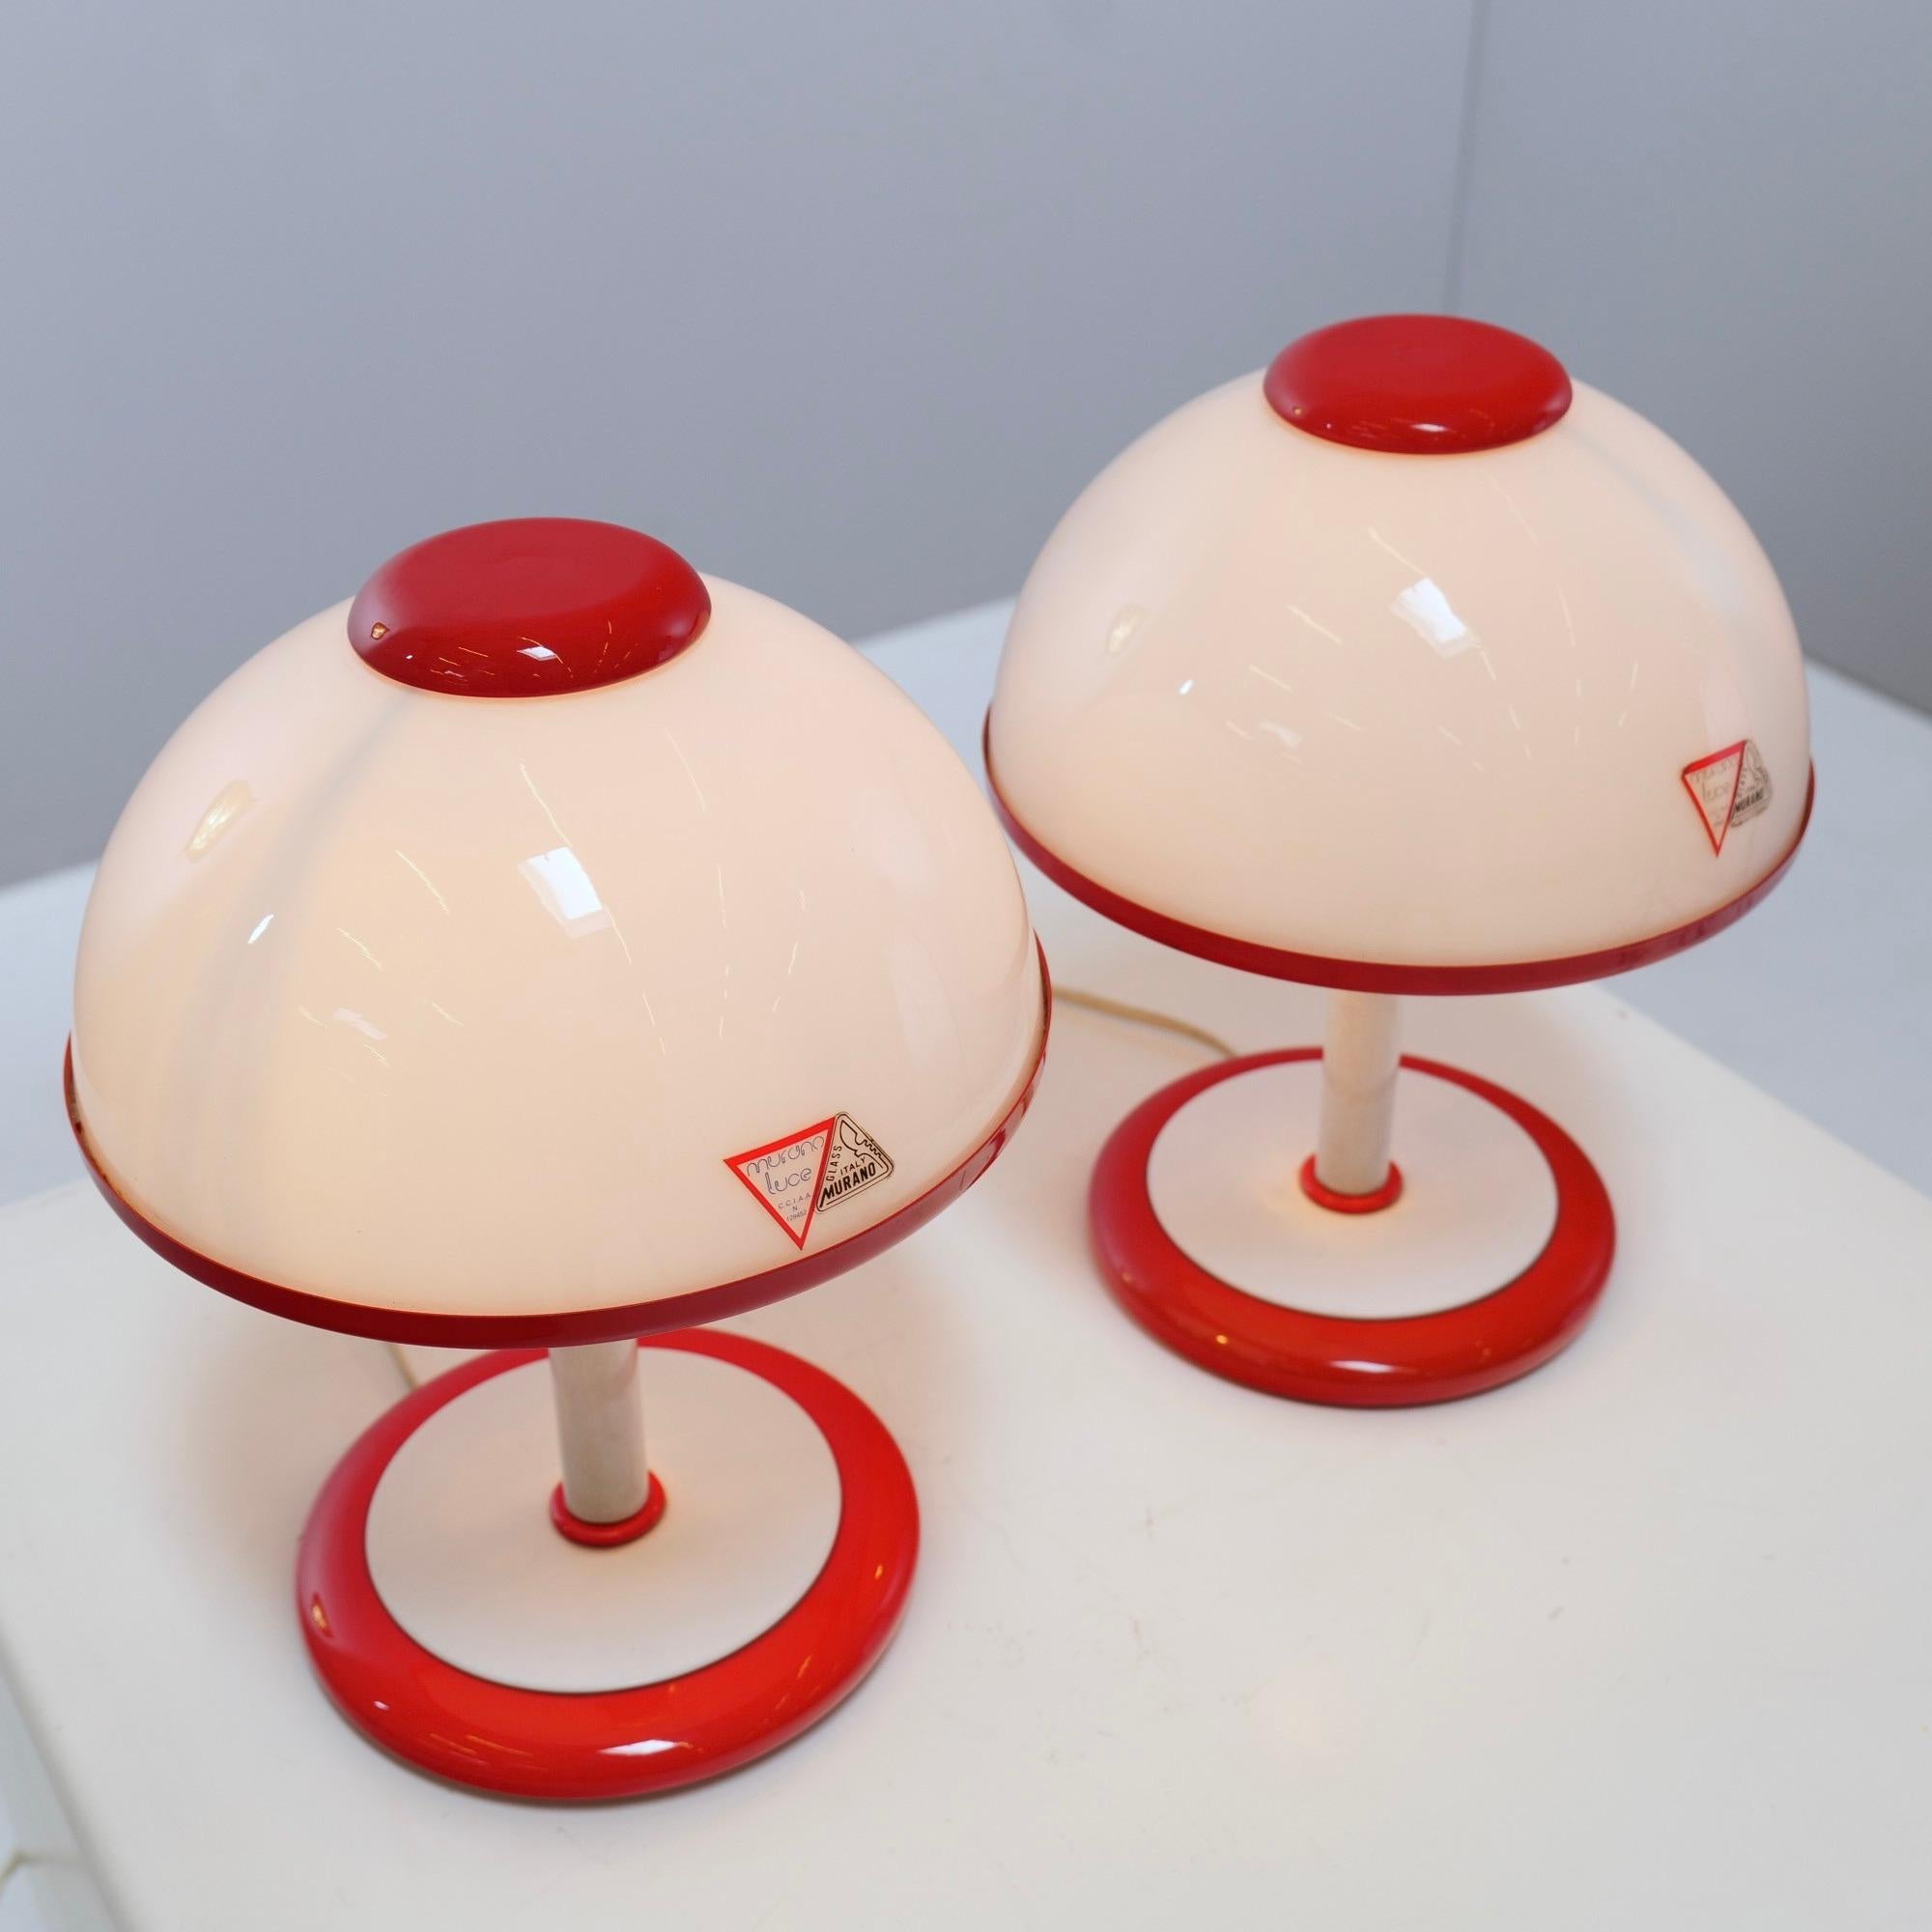 Et of murano glass lamps in red/white with makers tags.

1980's - Made in Italy by Murano Luce

dimensions:
33 cm height
20 cm diameter
colour: red and white
materials:
murano glass, metal
condition:
good condition with signs of use and